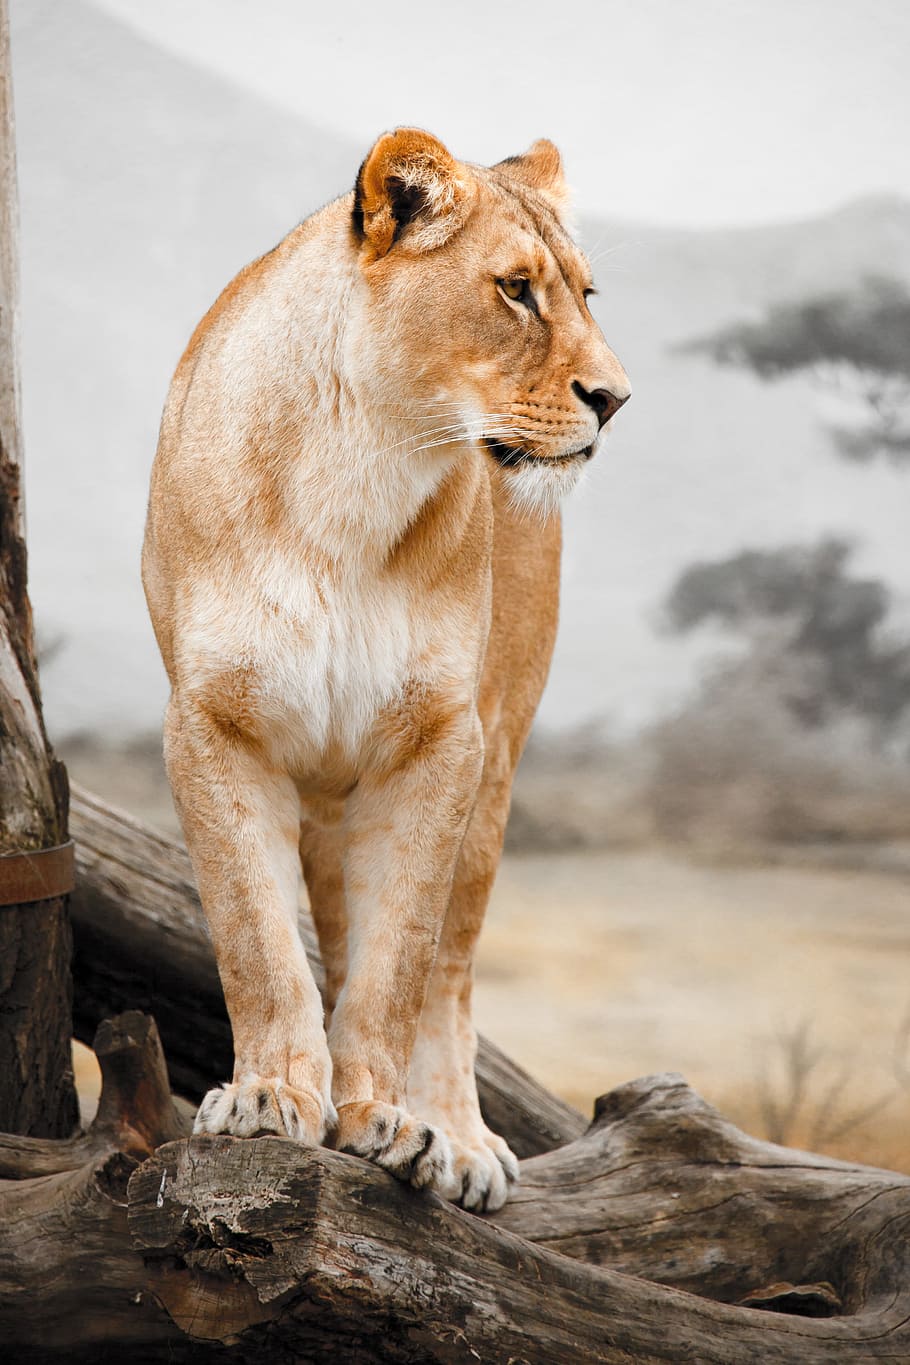 shallow focus photo of lioness on tree branch during daytime